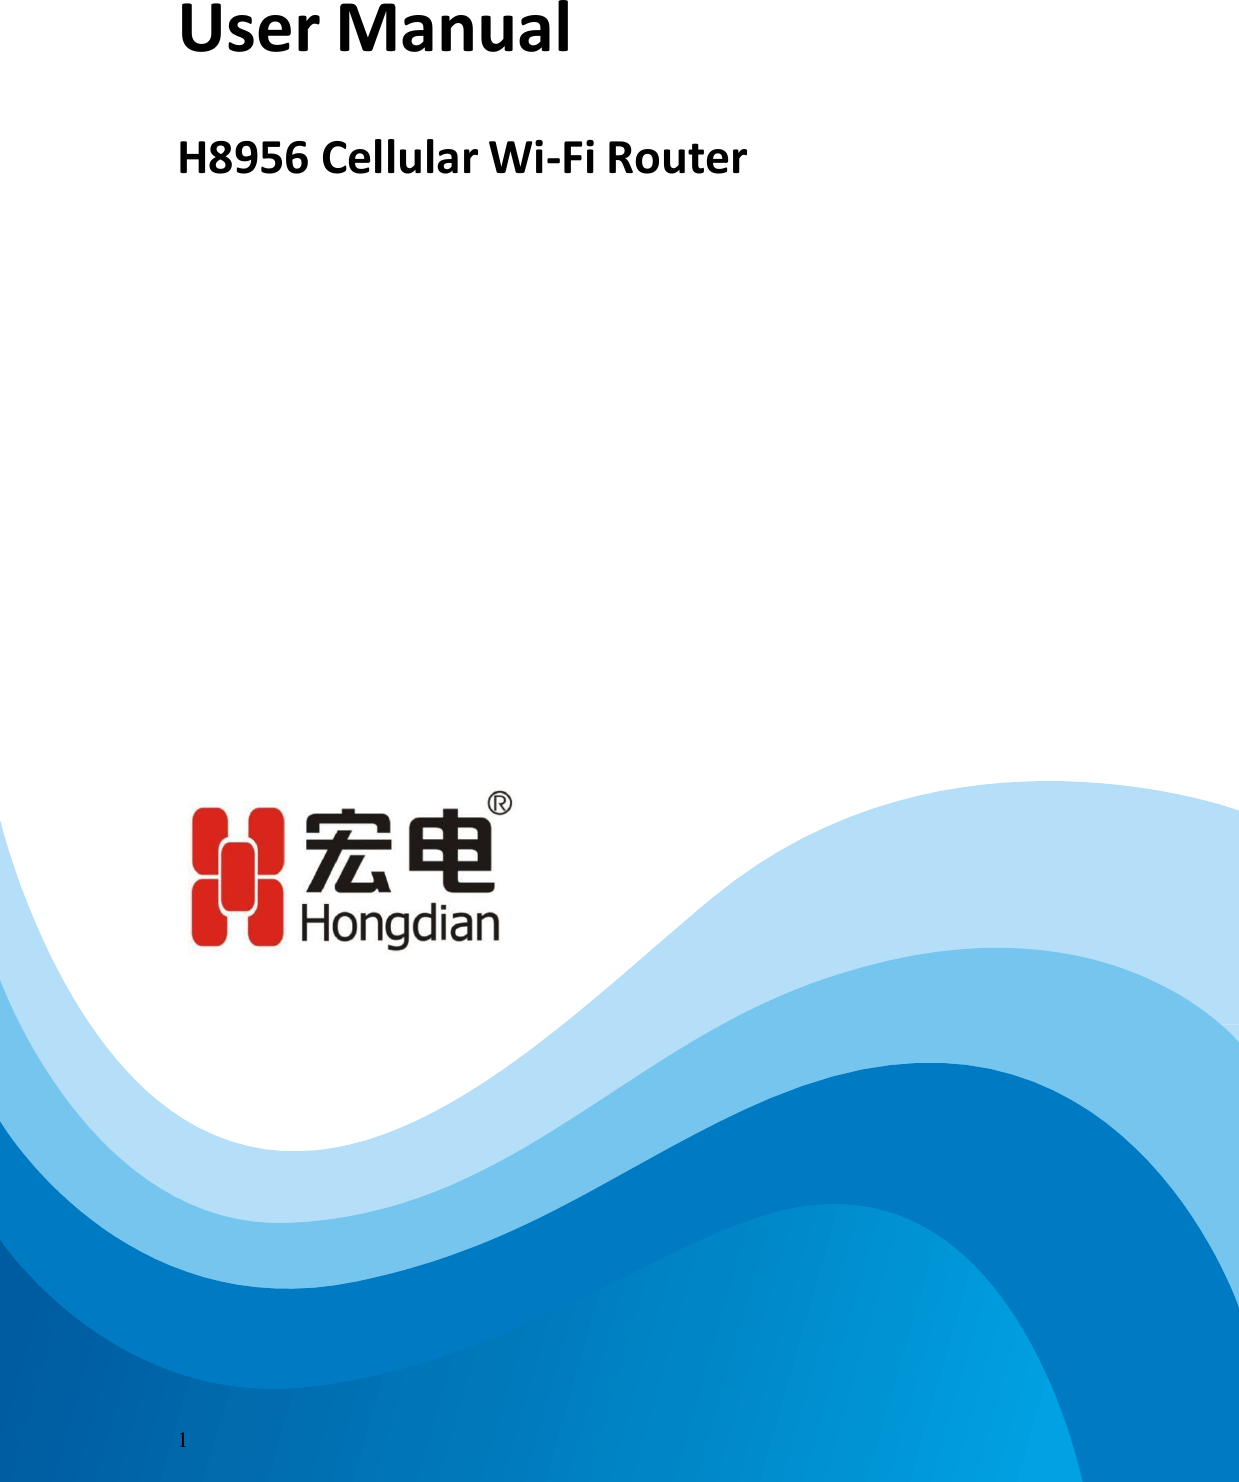     User Manual    H8956 Cellular Wi-Fi Router                                                            1 